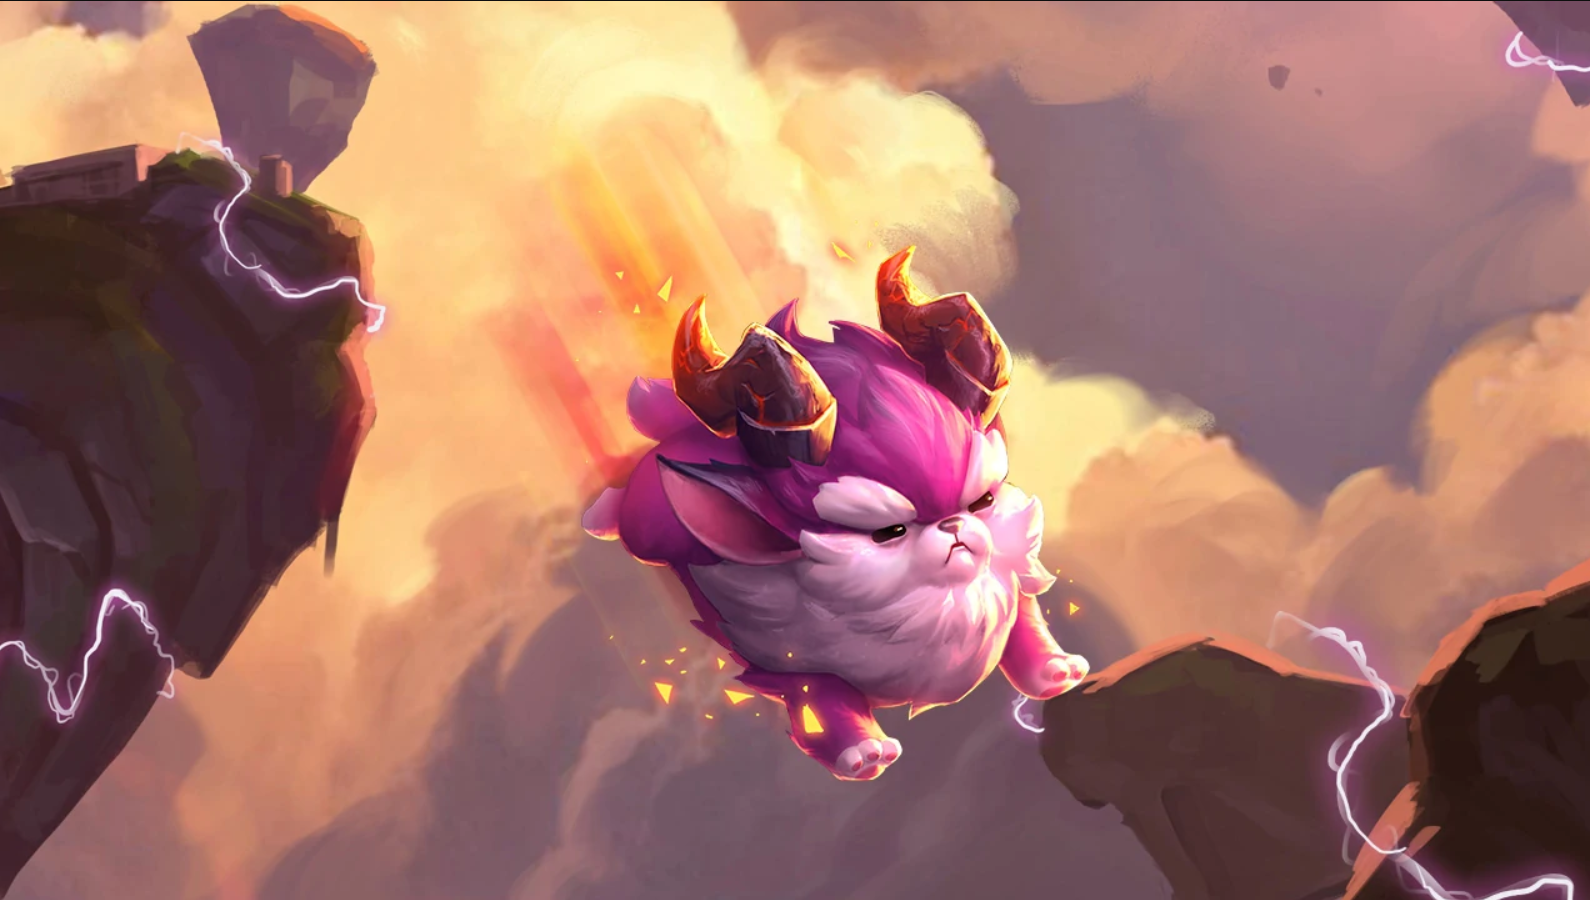 Teamfight Tactics Meta: Best Comps and Builds for TFT Set 6.5 (Patch 12.9)